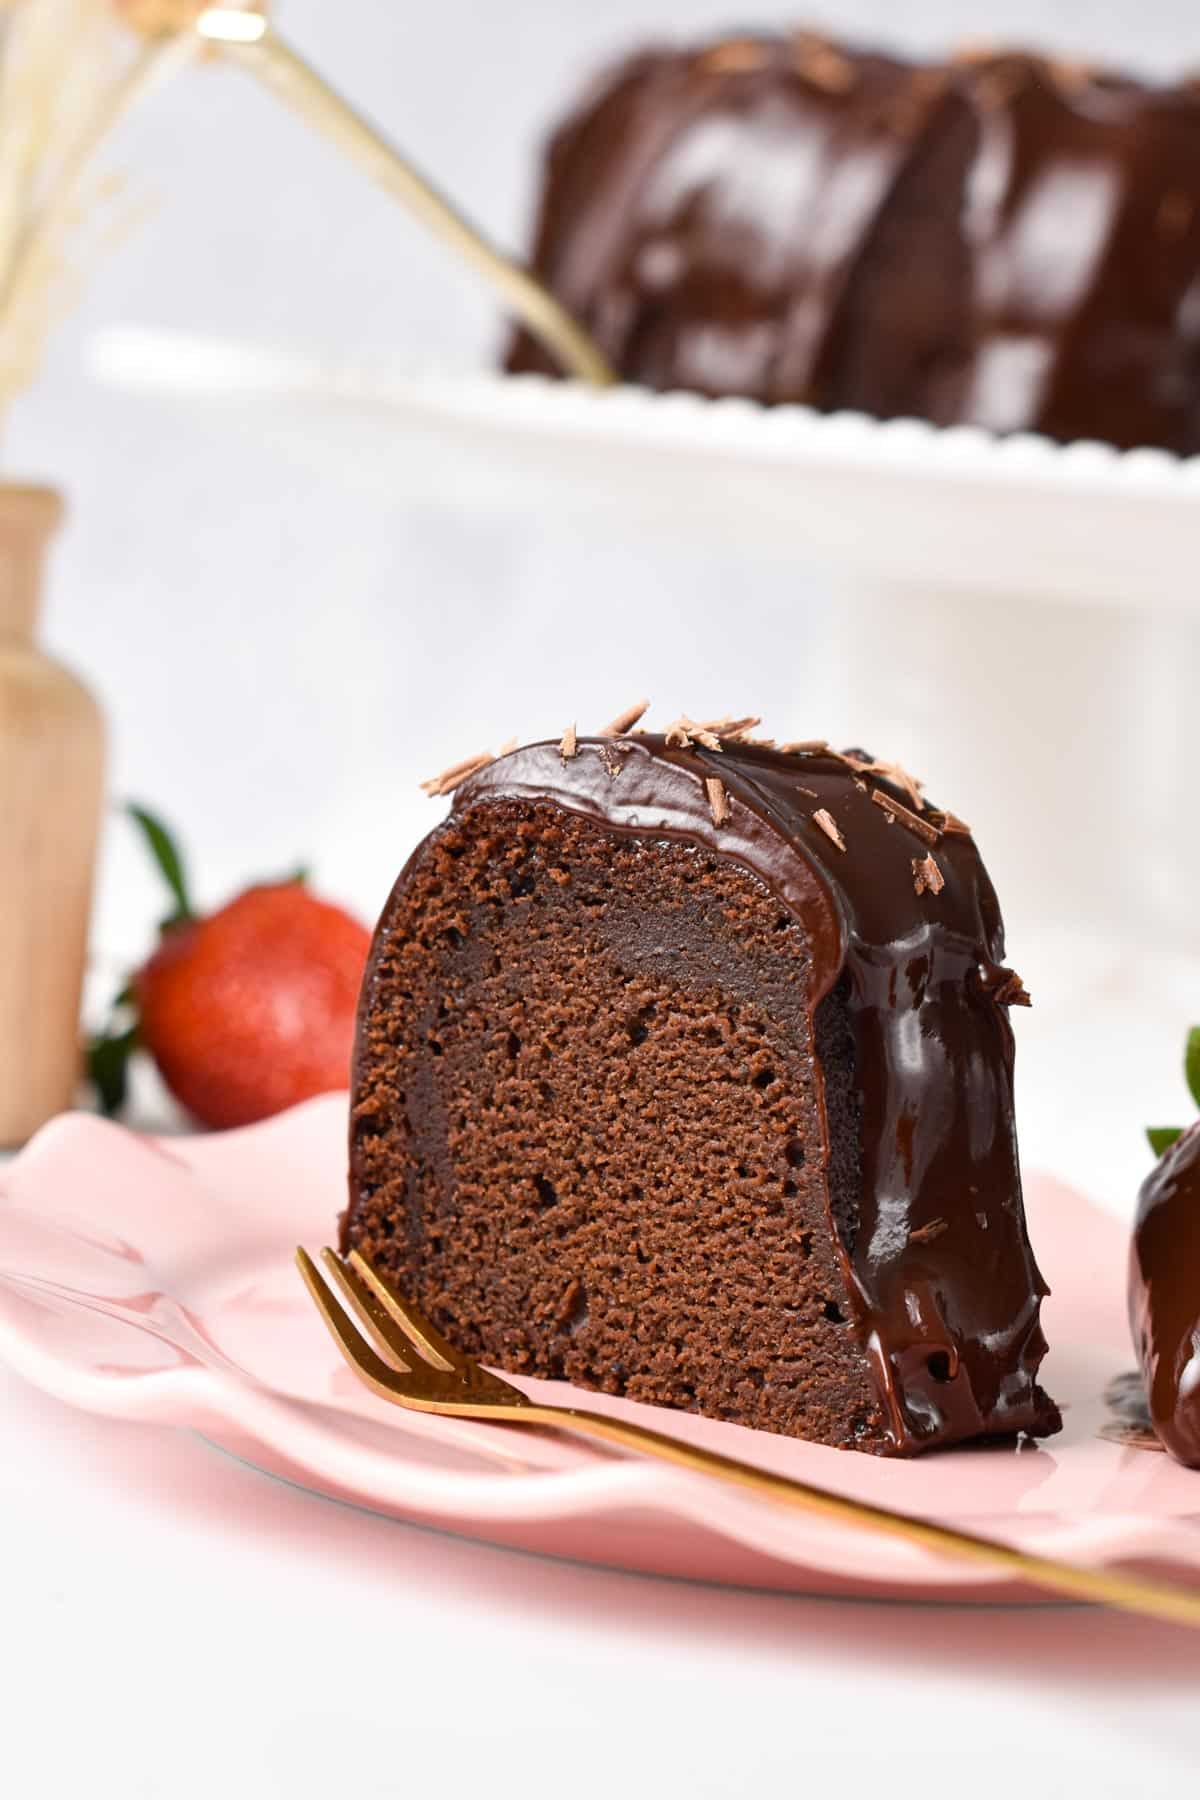 A slice of vegan chocolate Bundt cake on a pink plate with a golden fork on side and strawberries in the background.